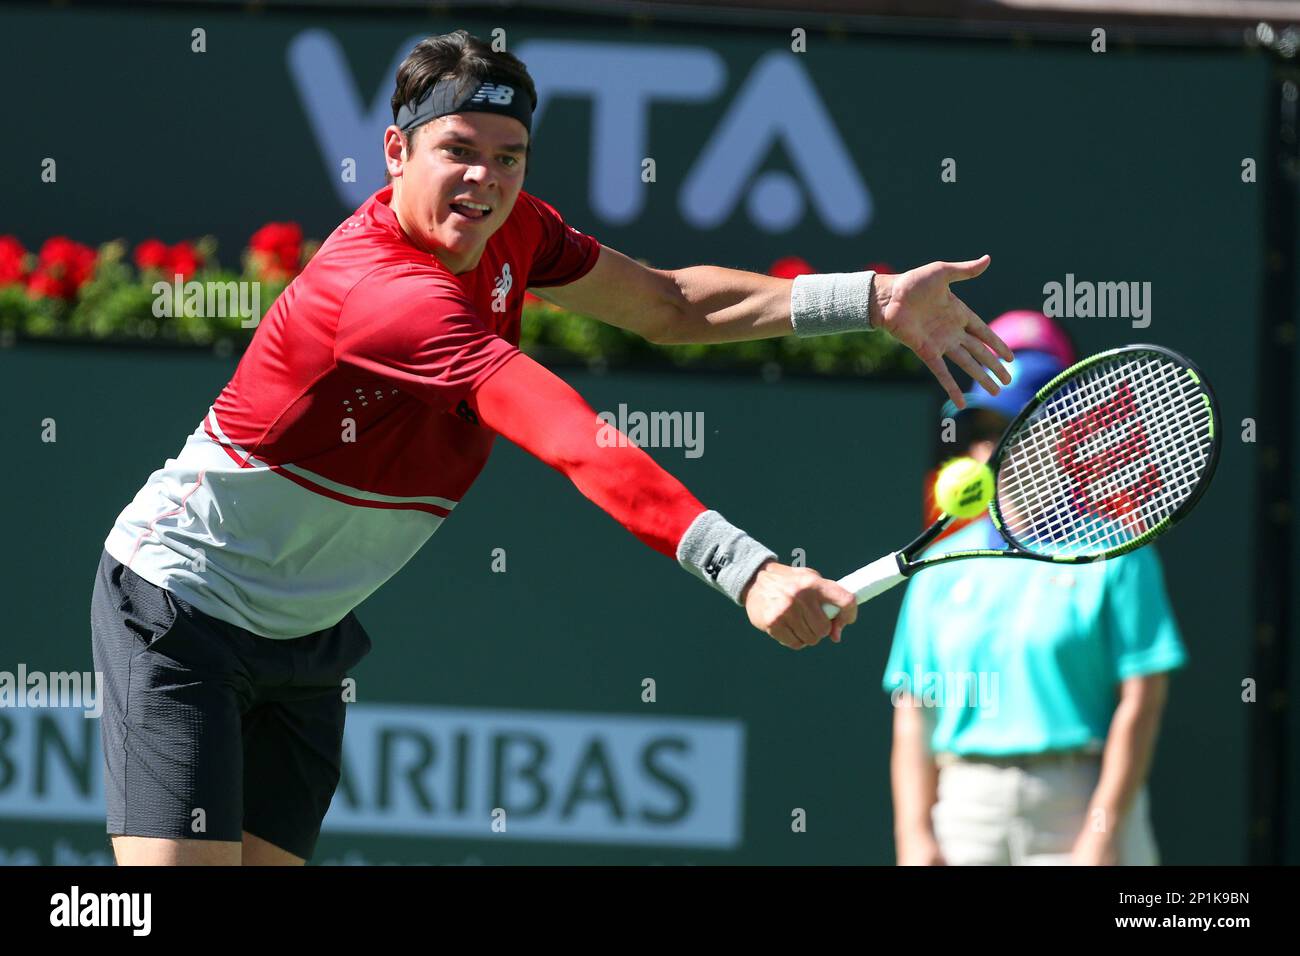 March 16, 2016: Milos Raonic of Canada returns a shot against Tomas Berdych  of Czech Republic during the 2016 BNP Paribas Open at Indian Wells Tennis  Garden in Indian Wells, California. Charles